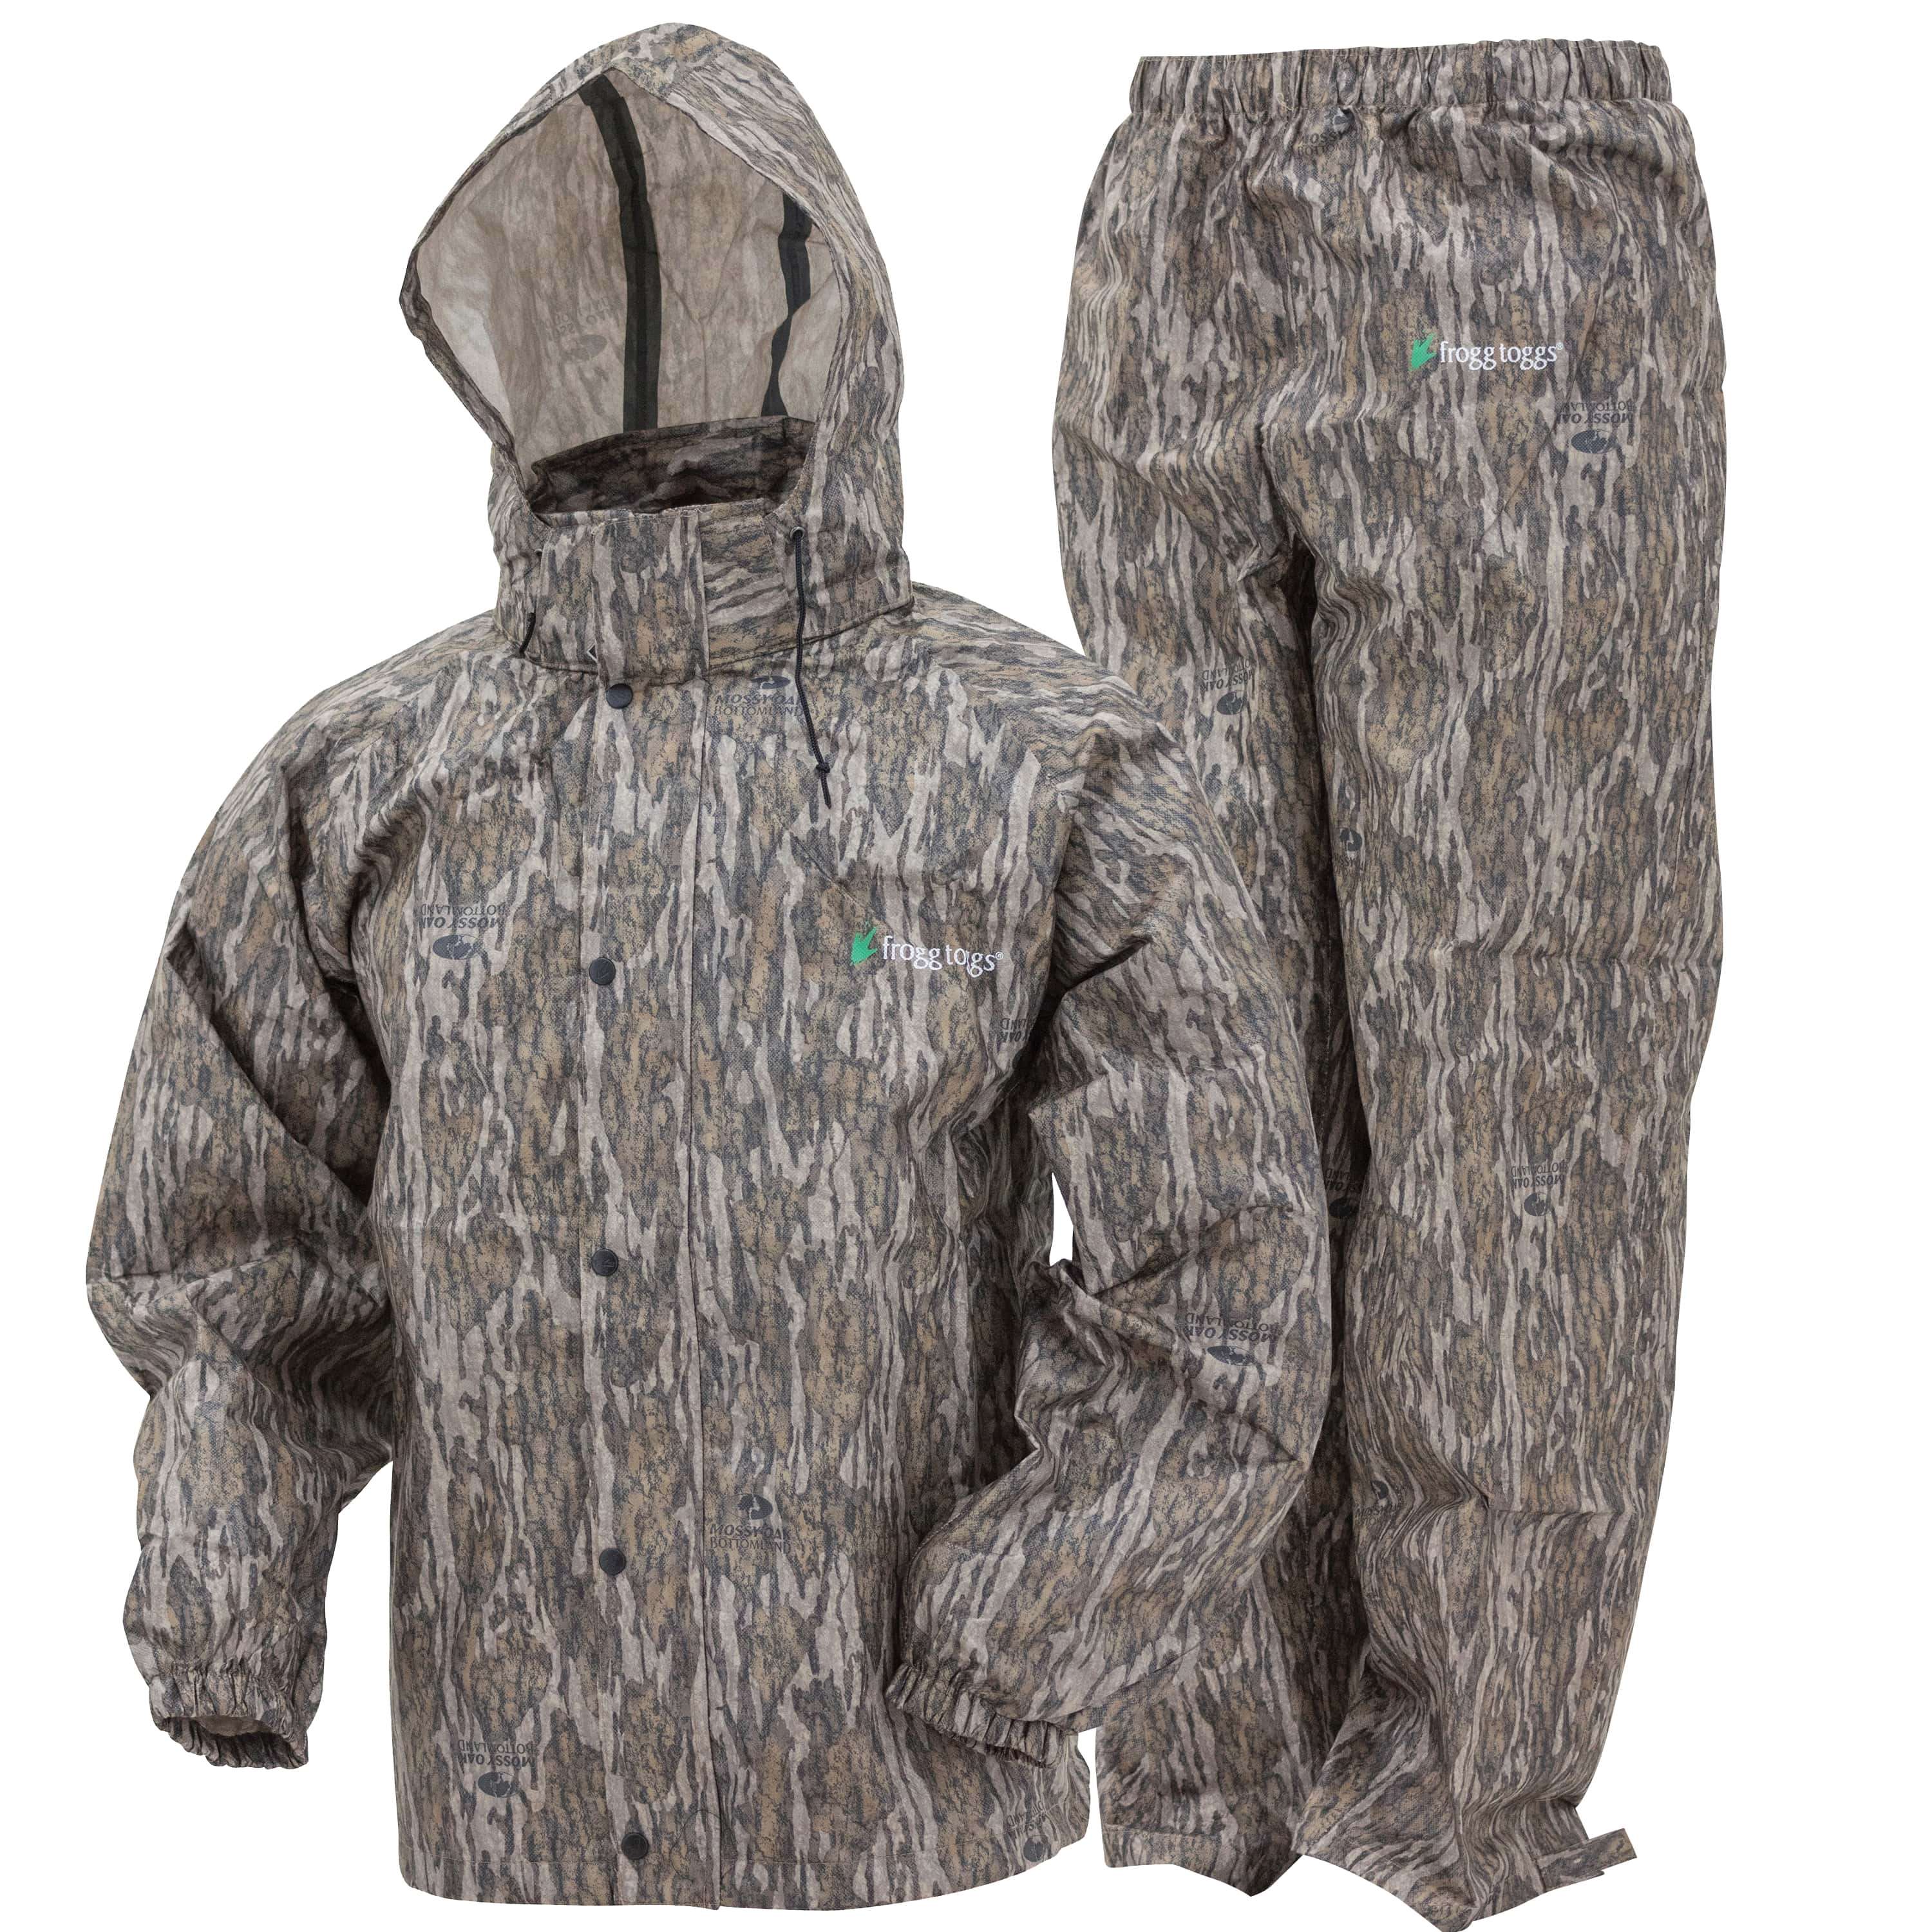 Frogg Toggs ALL SPORT Mossy Oak BU Country Camo 2-pc Rain Suit Adult X-LARGE 